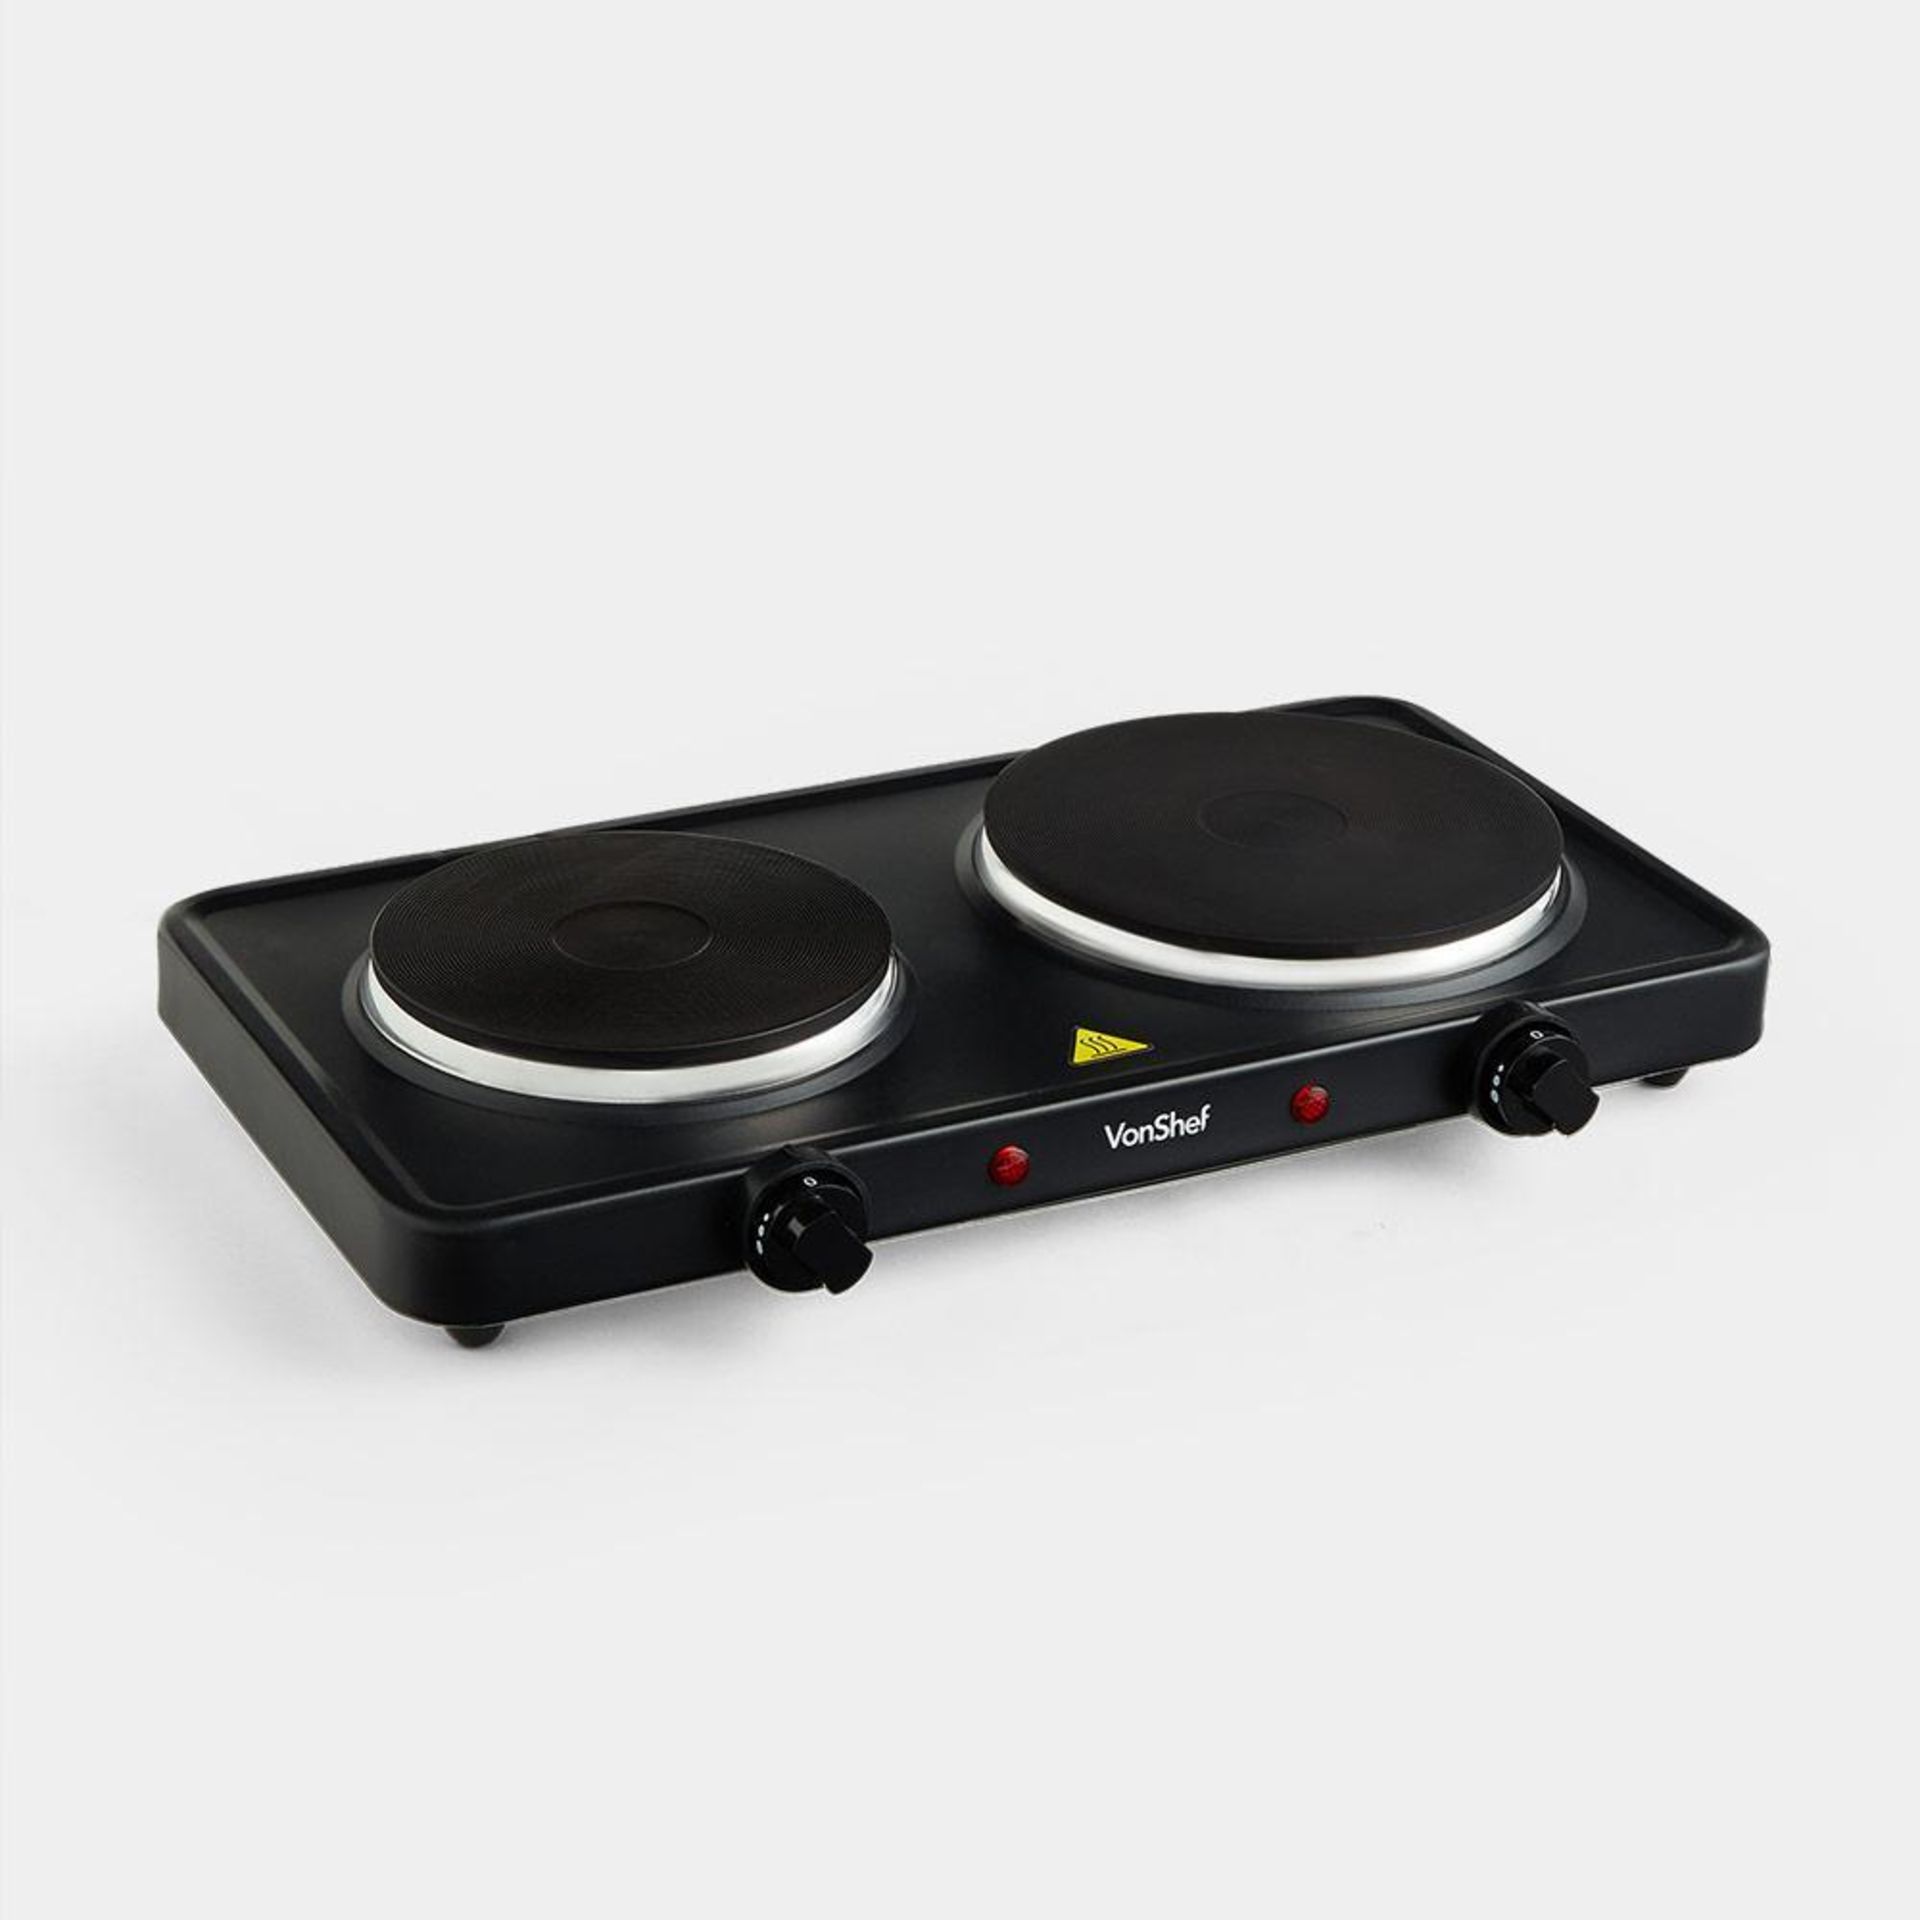 Double Hot Plate - S2. This Luxury Double Hot Plate is small but mighty. Completely portable &